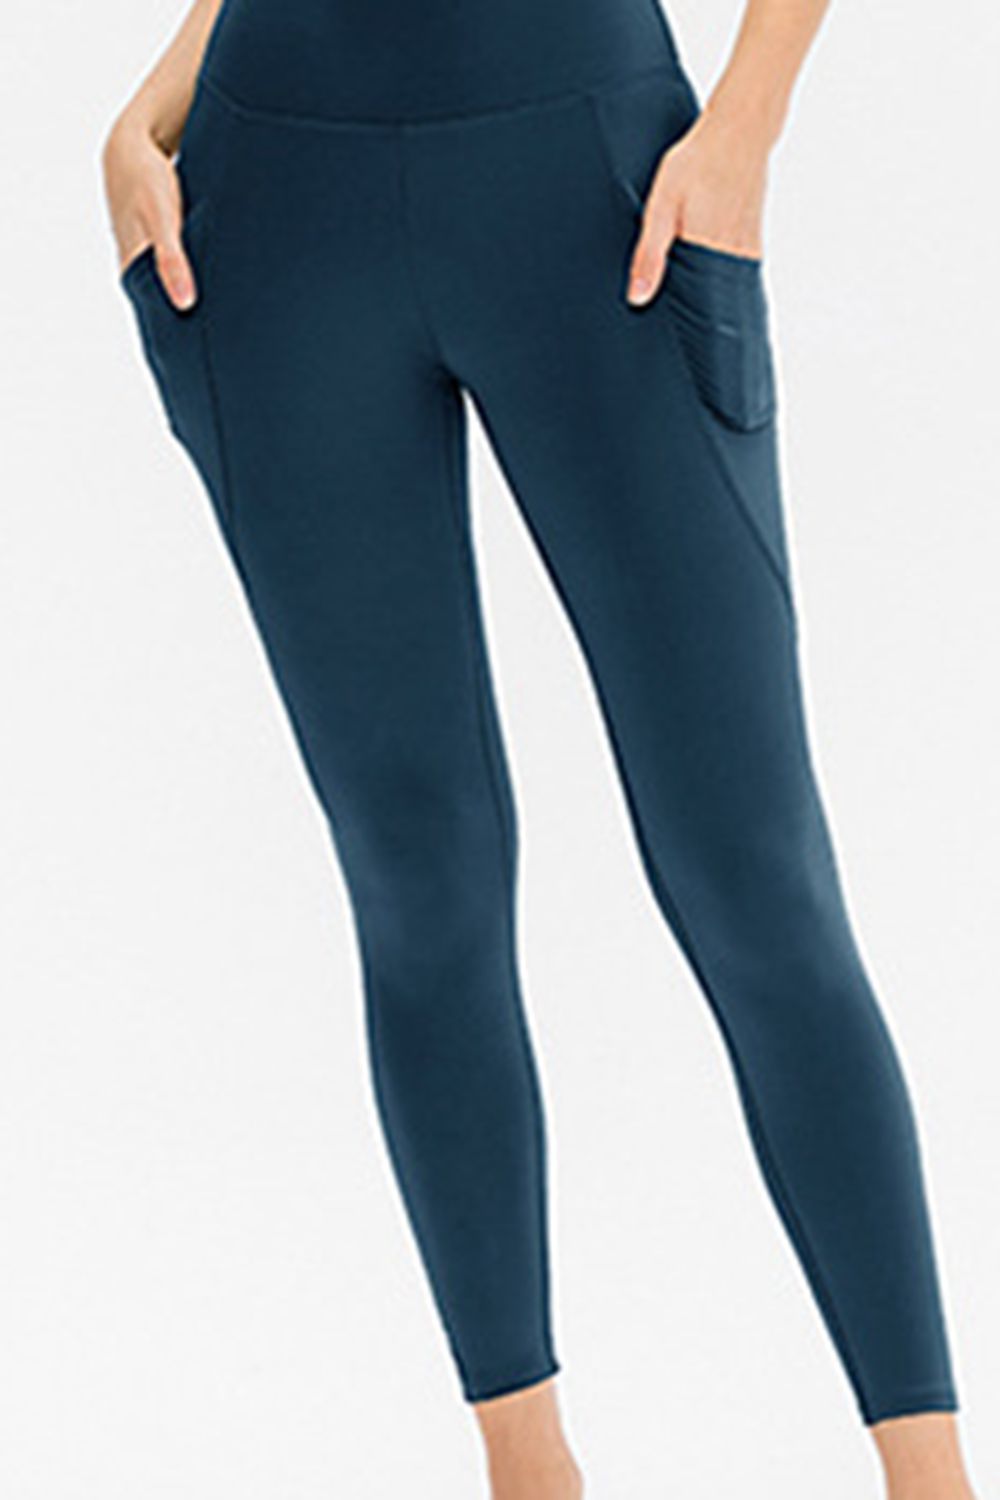 Slim Fit Long Active Leggings with Pockets - Women’s Clothing & Accessories - Activewear - 8 - 2024